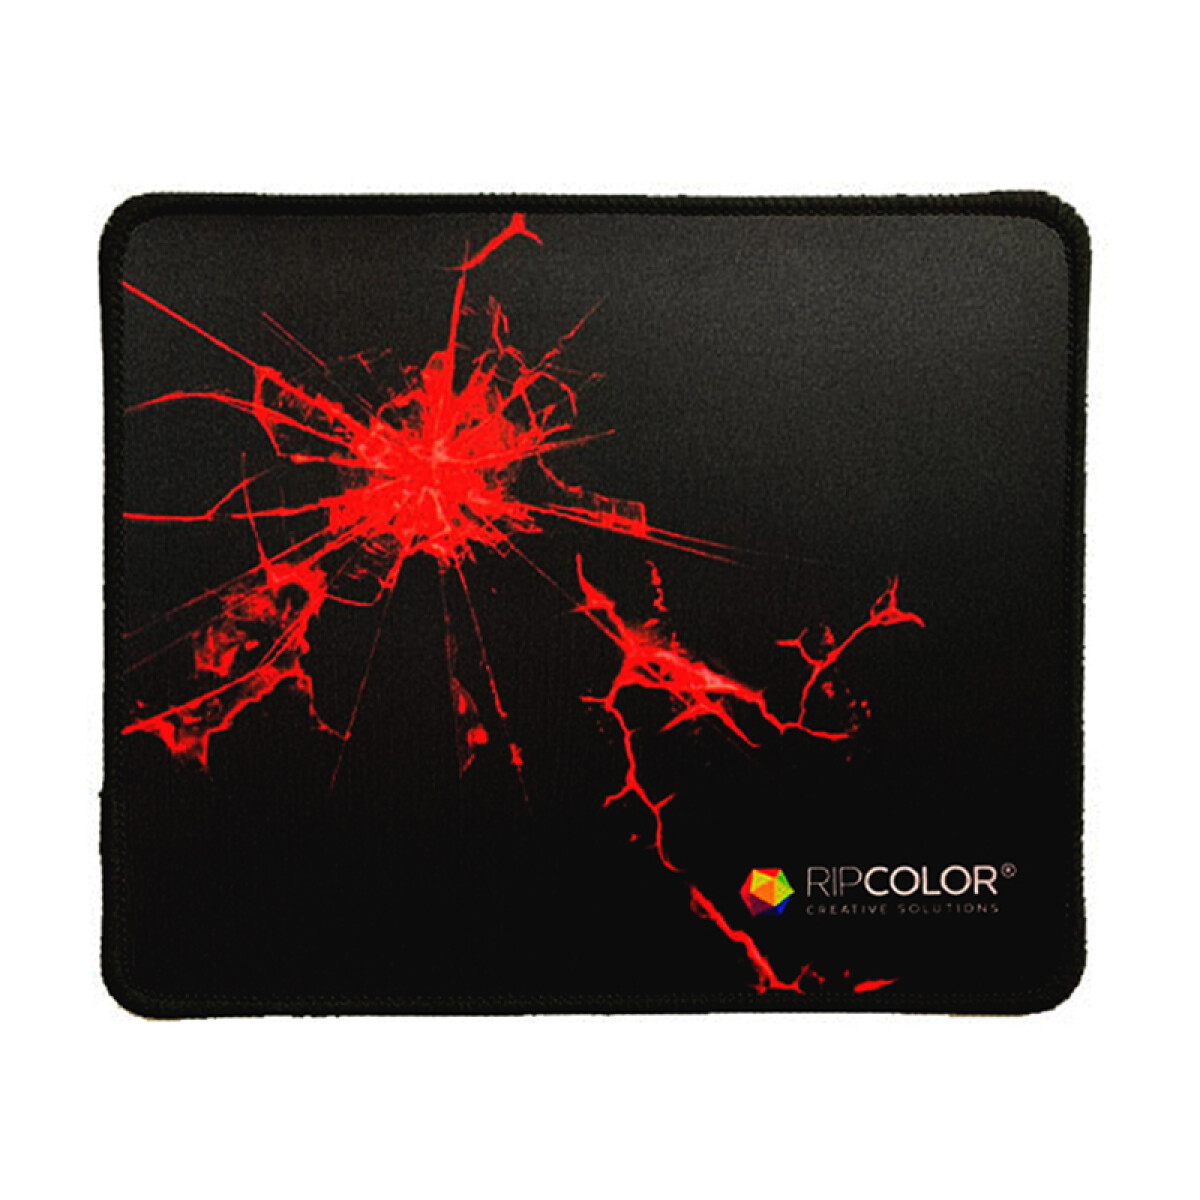 Mouse Pad Ripcolor black-red D0502 - Unica 